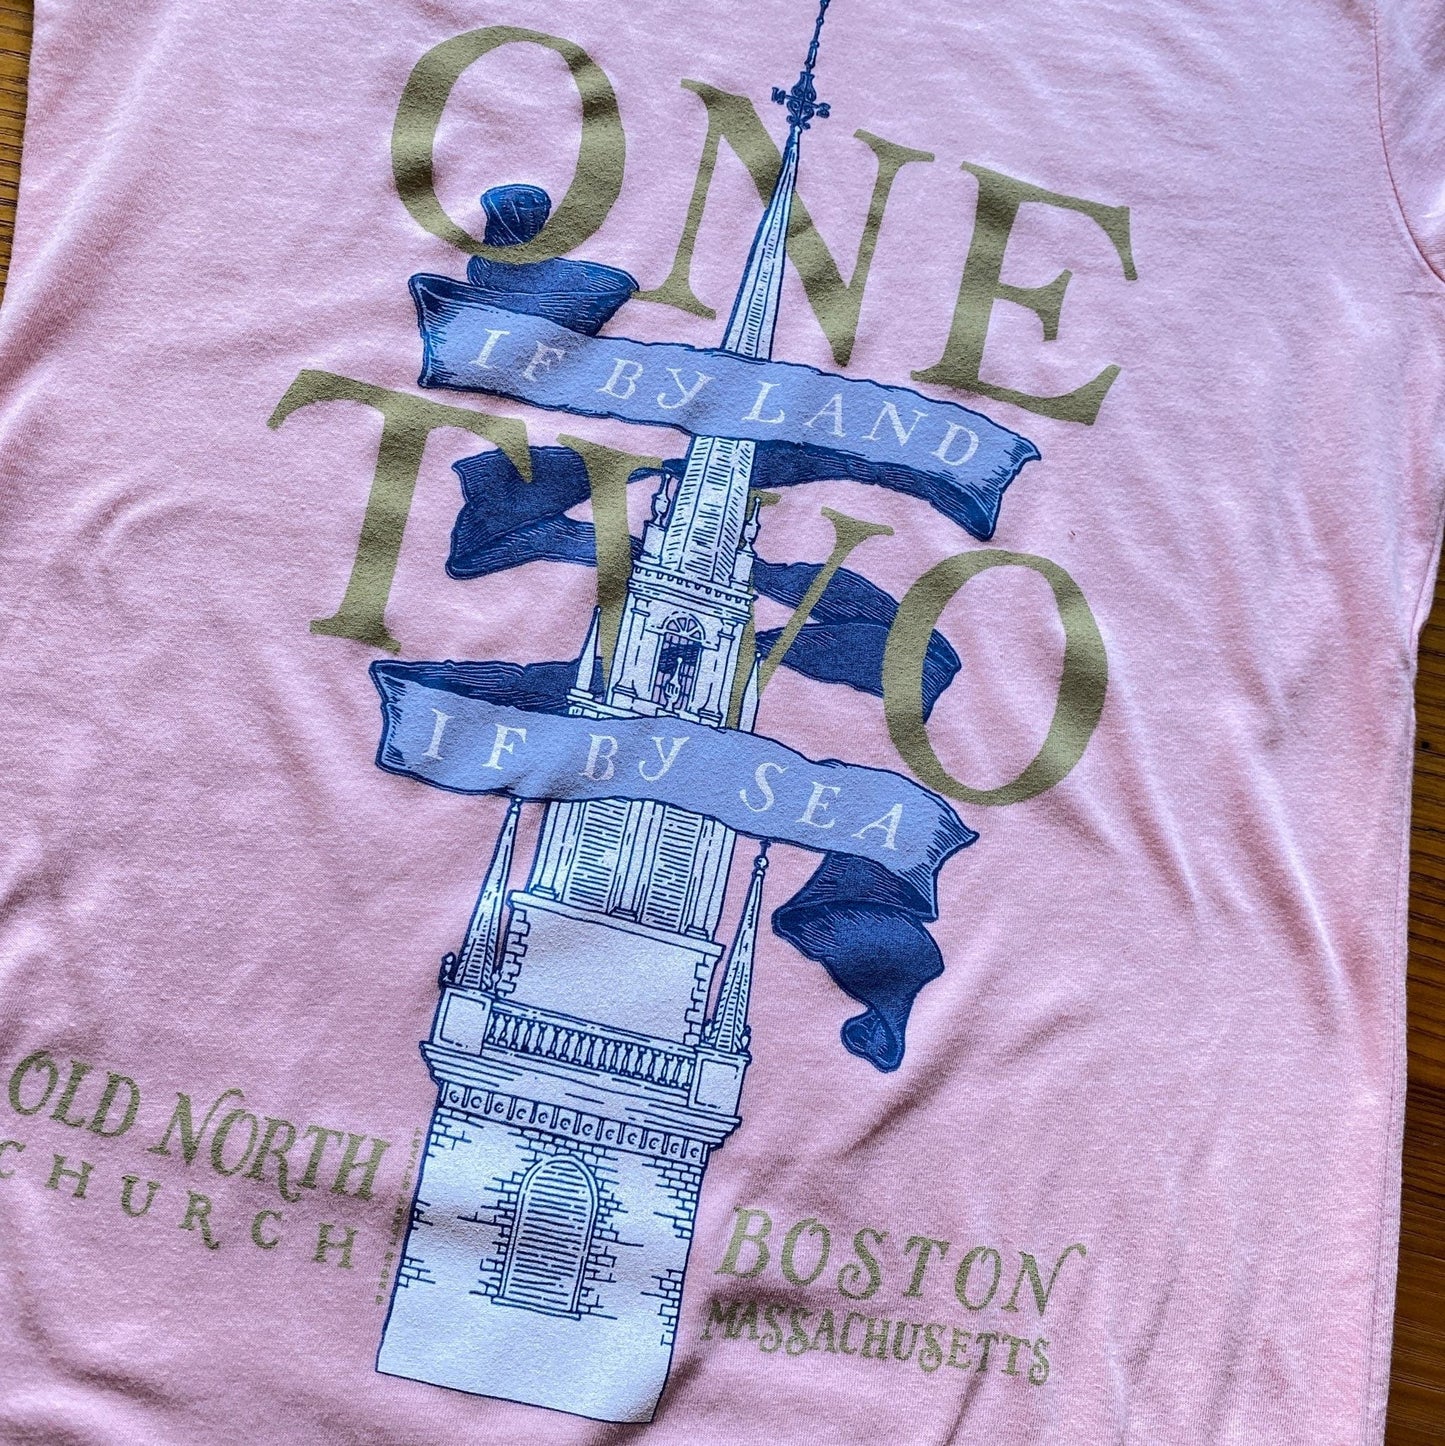 Close-up of Pink "One if by land . . ." Old North Special Edition T-shirt in Youth sizes from the history list store